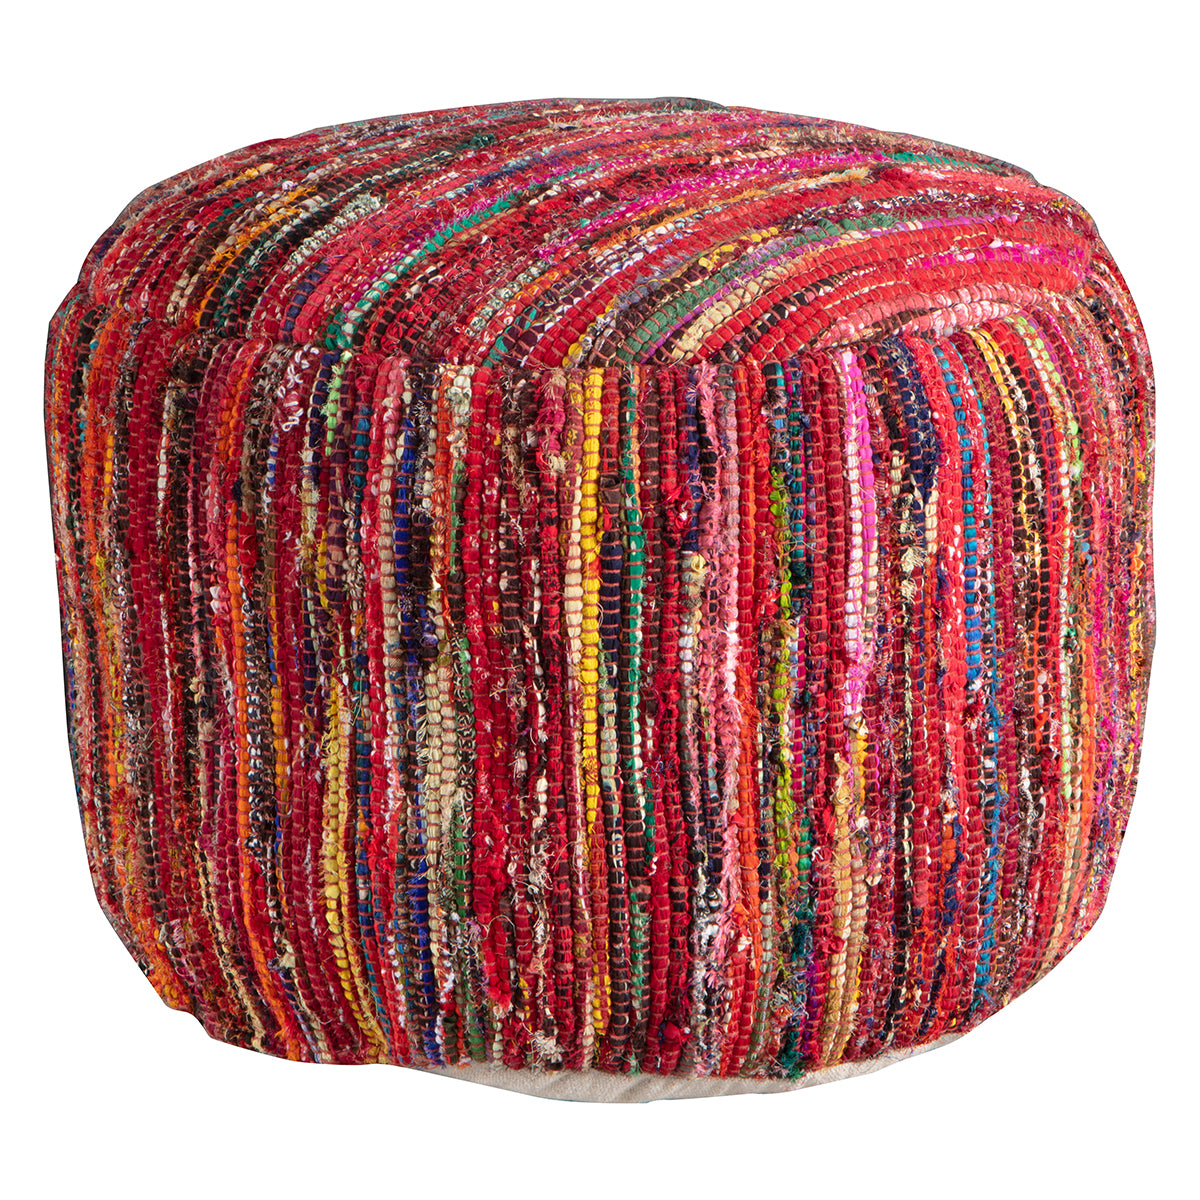 A colorful Diaz Pouffe Multi with multi colored stripes from Kikiathome.co.uk, perfect for home furniture and interior decor.